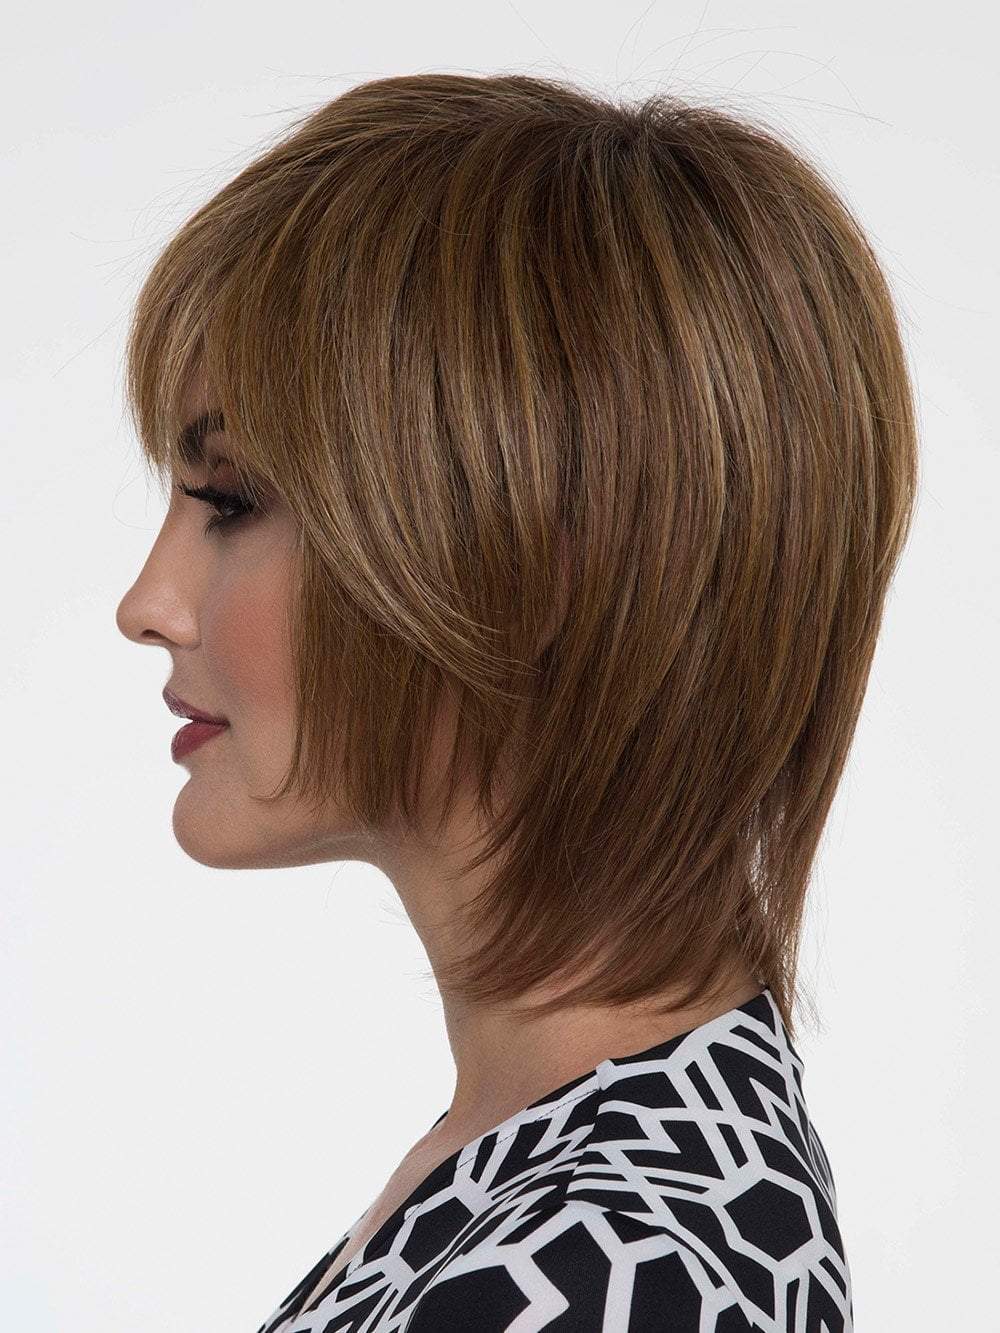 The Monofilament Top construction offers hand-tied sides and back, which allows you to part this wig left, right, or down the center